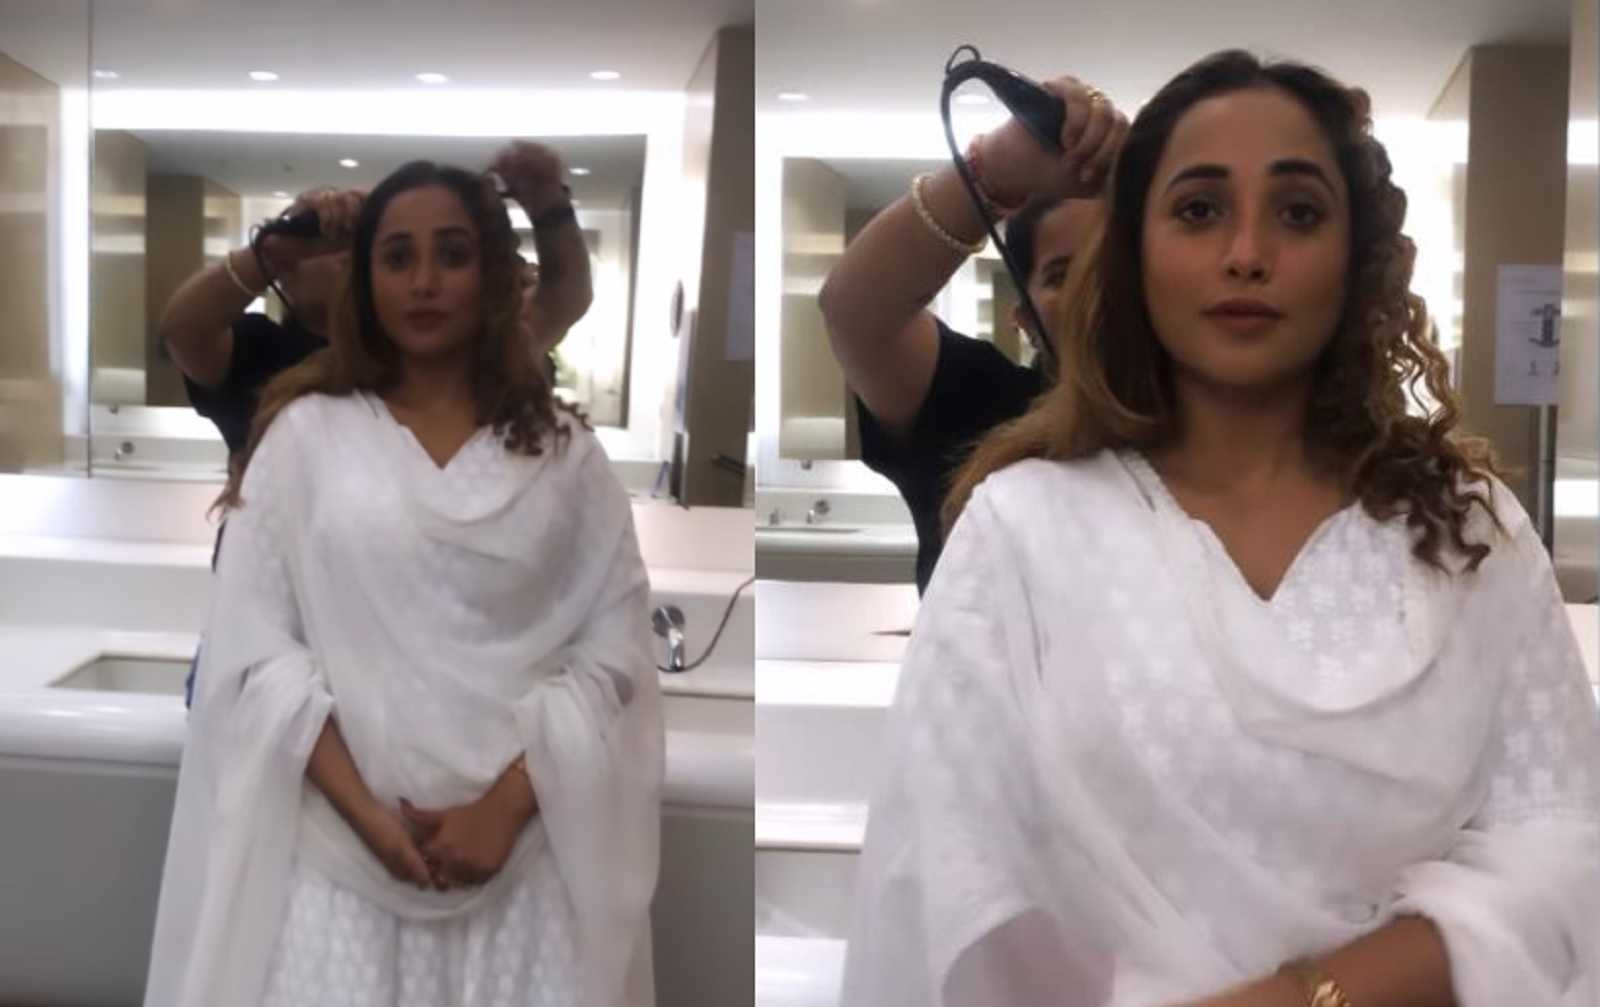 Bhojpuri star Rani Chatterjee curls her hair in the airport washroom to save time, calls it 'pagalpanti'